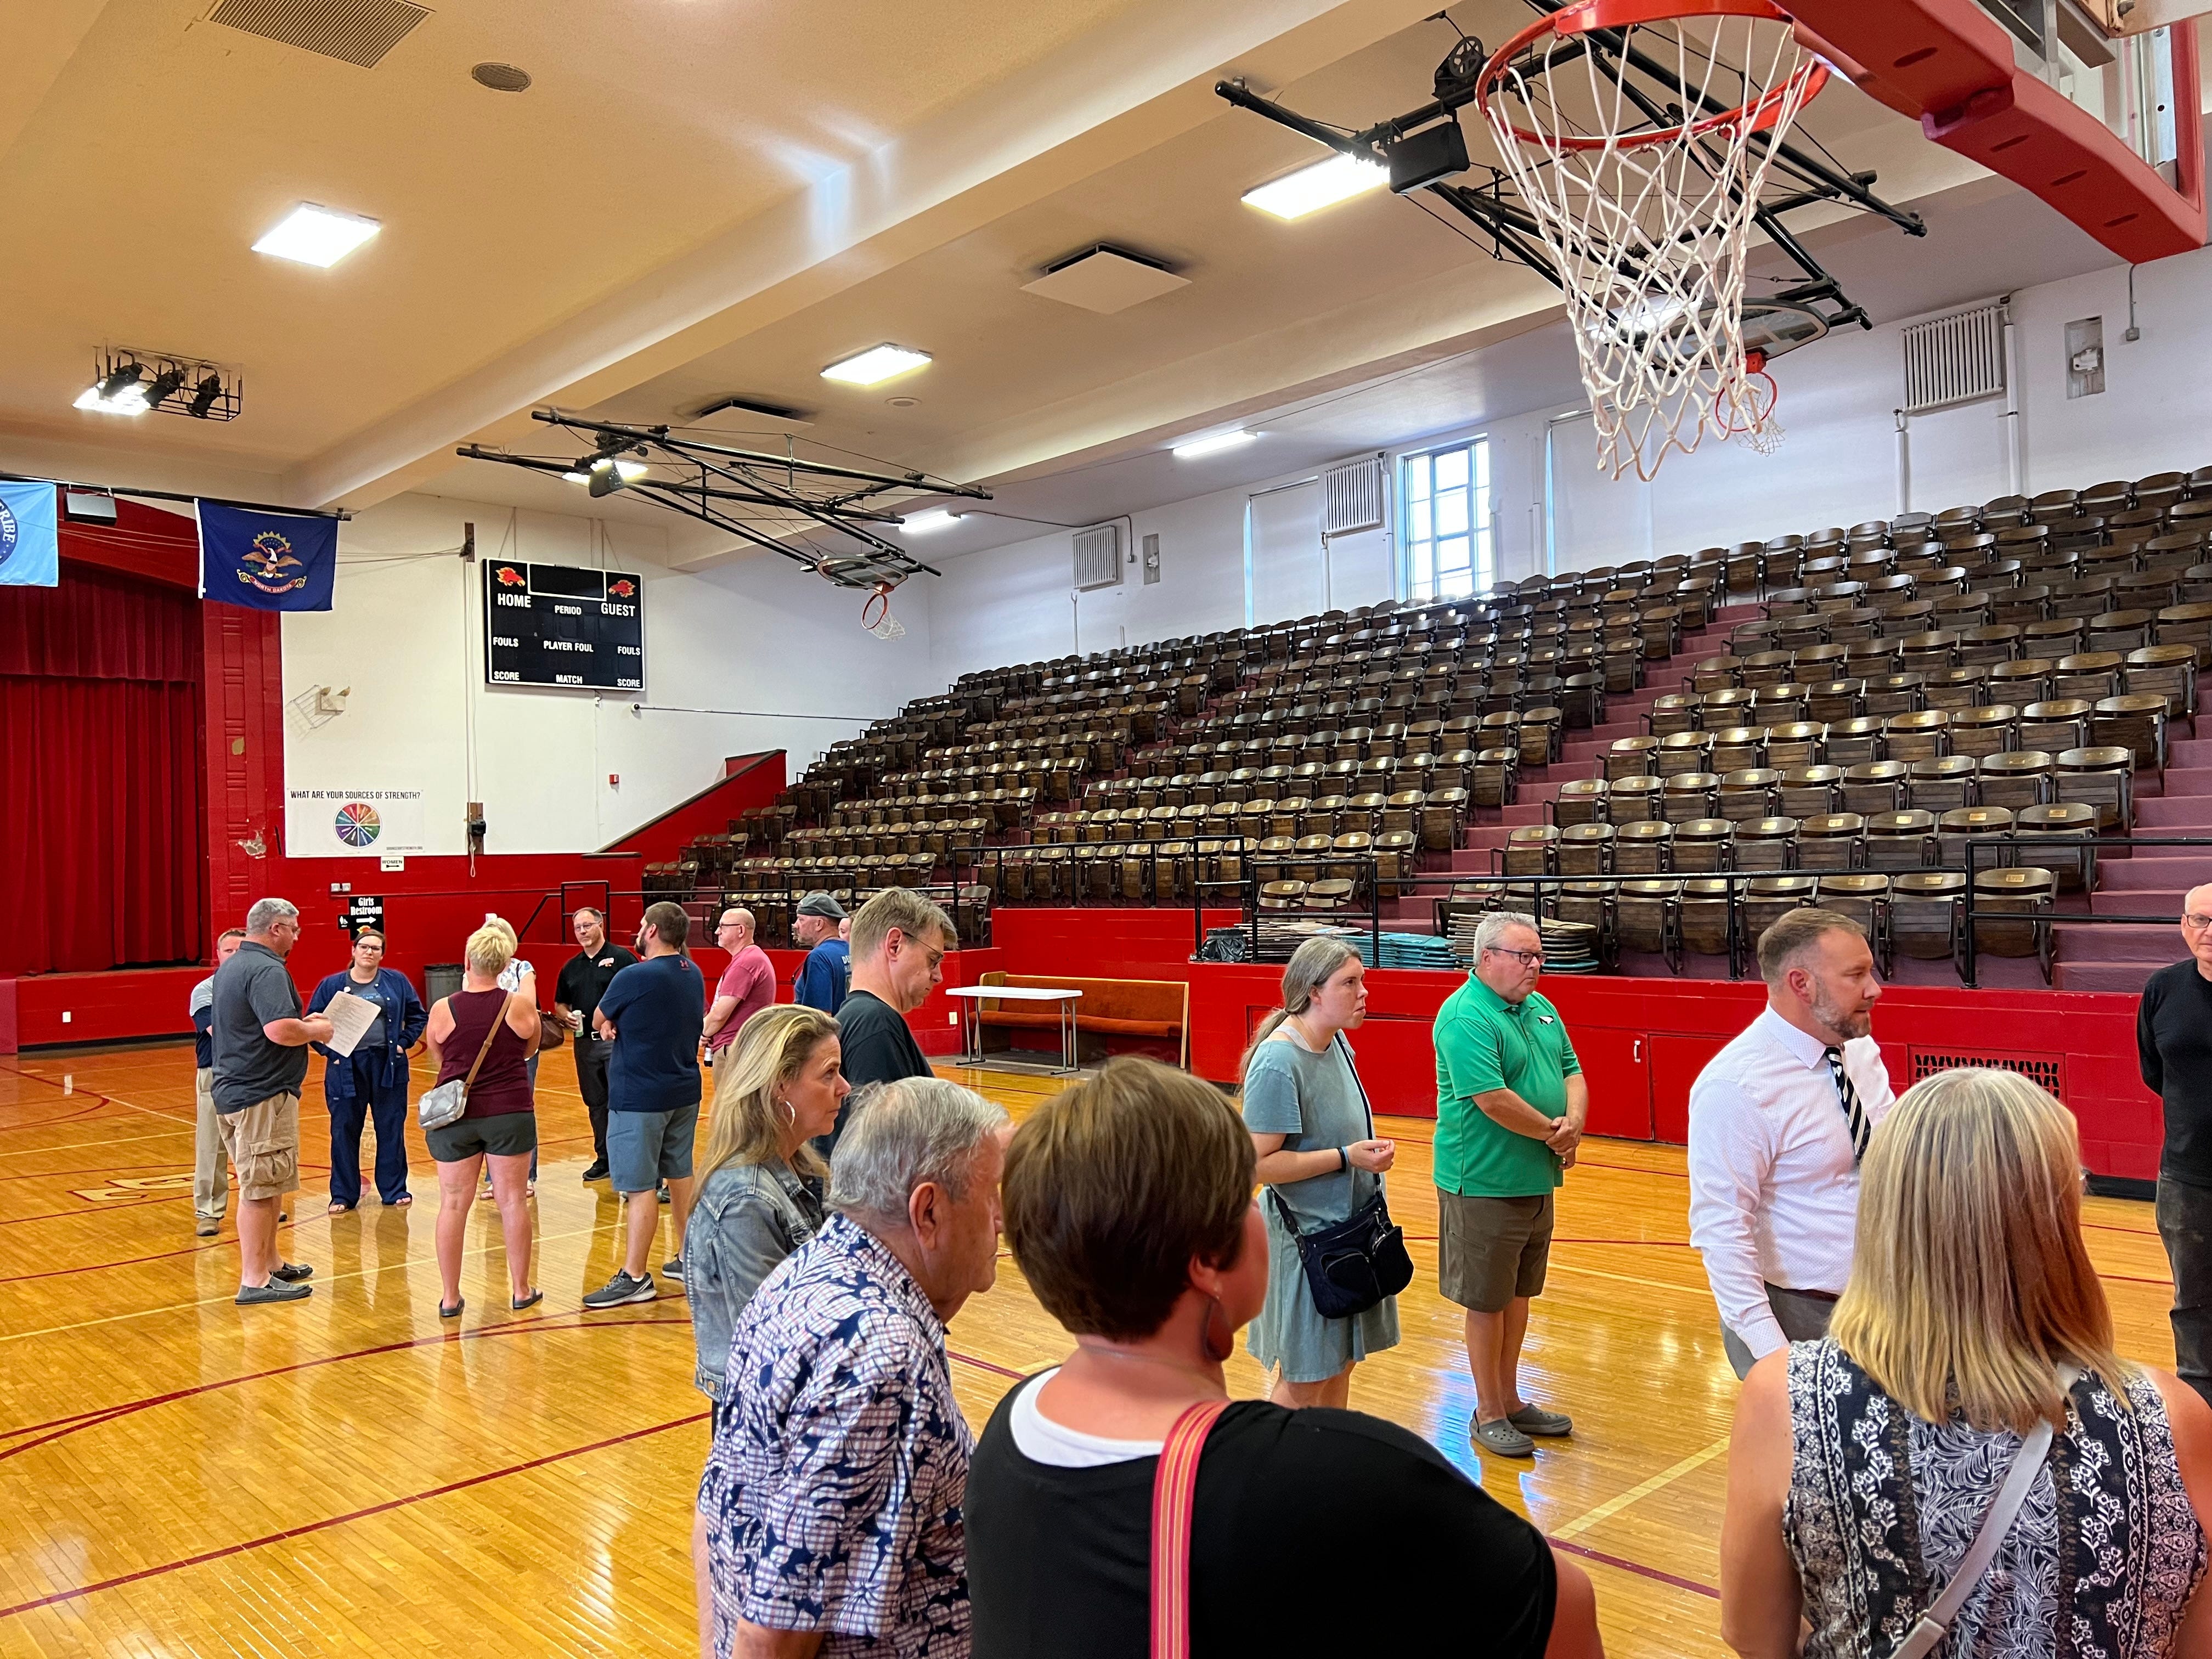 A public meeting at Central Middle School (CMS) allowed community members to tour the facility and provide feedback on Aug. 16.